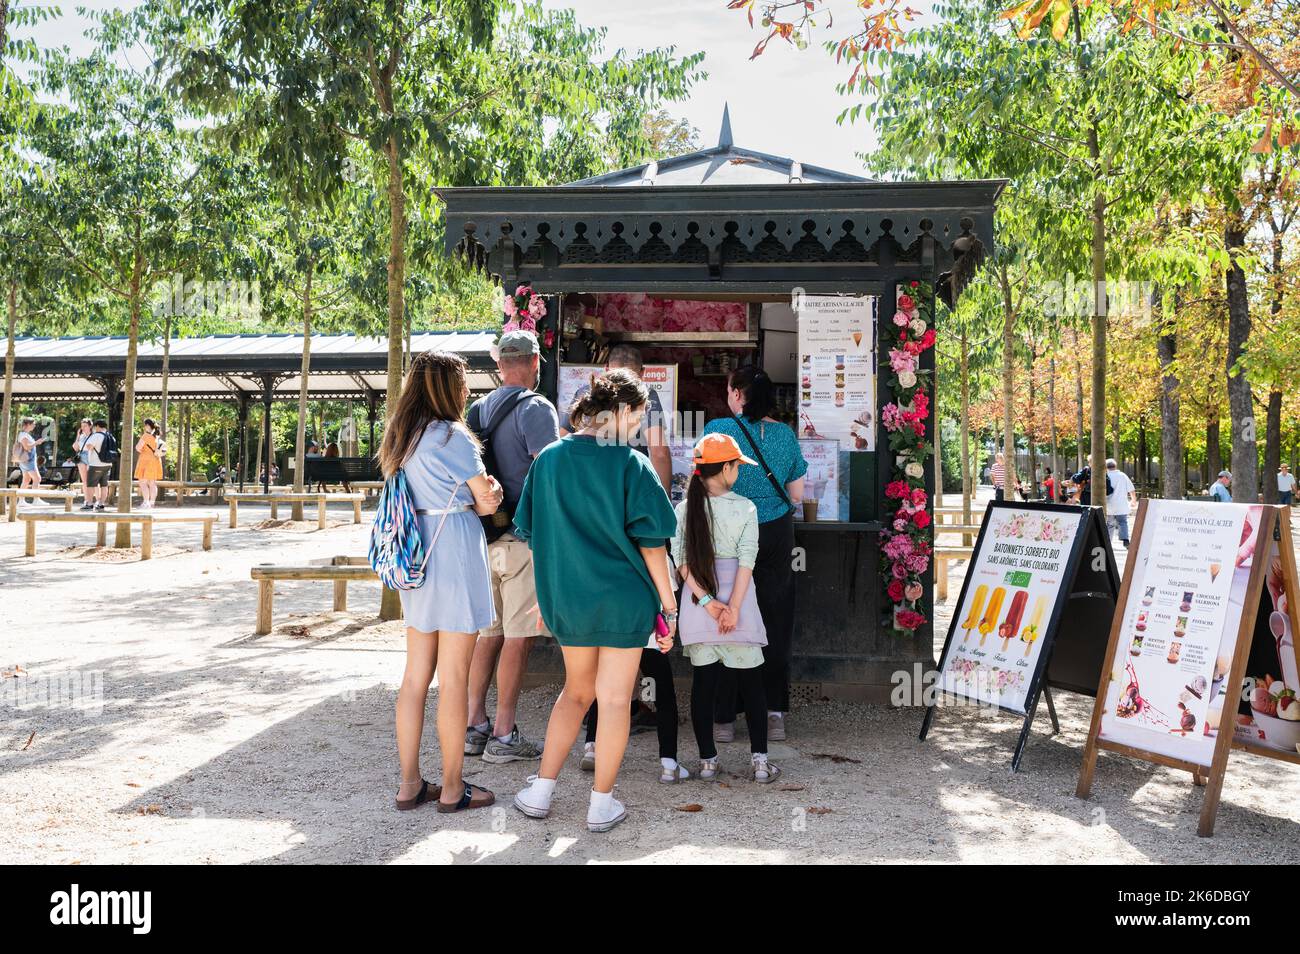 Paris, France - August 27 2022: Ice cream and coffee kiosk in Luxembourg Gardens located between Saint-Germain and Latin Quarter in Paris. People queueing for ice lollies and drinks Stock Photo